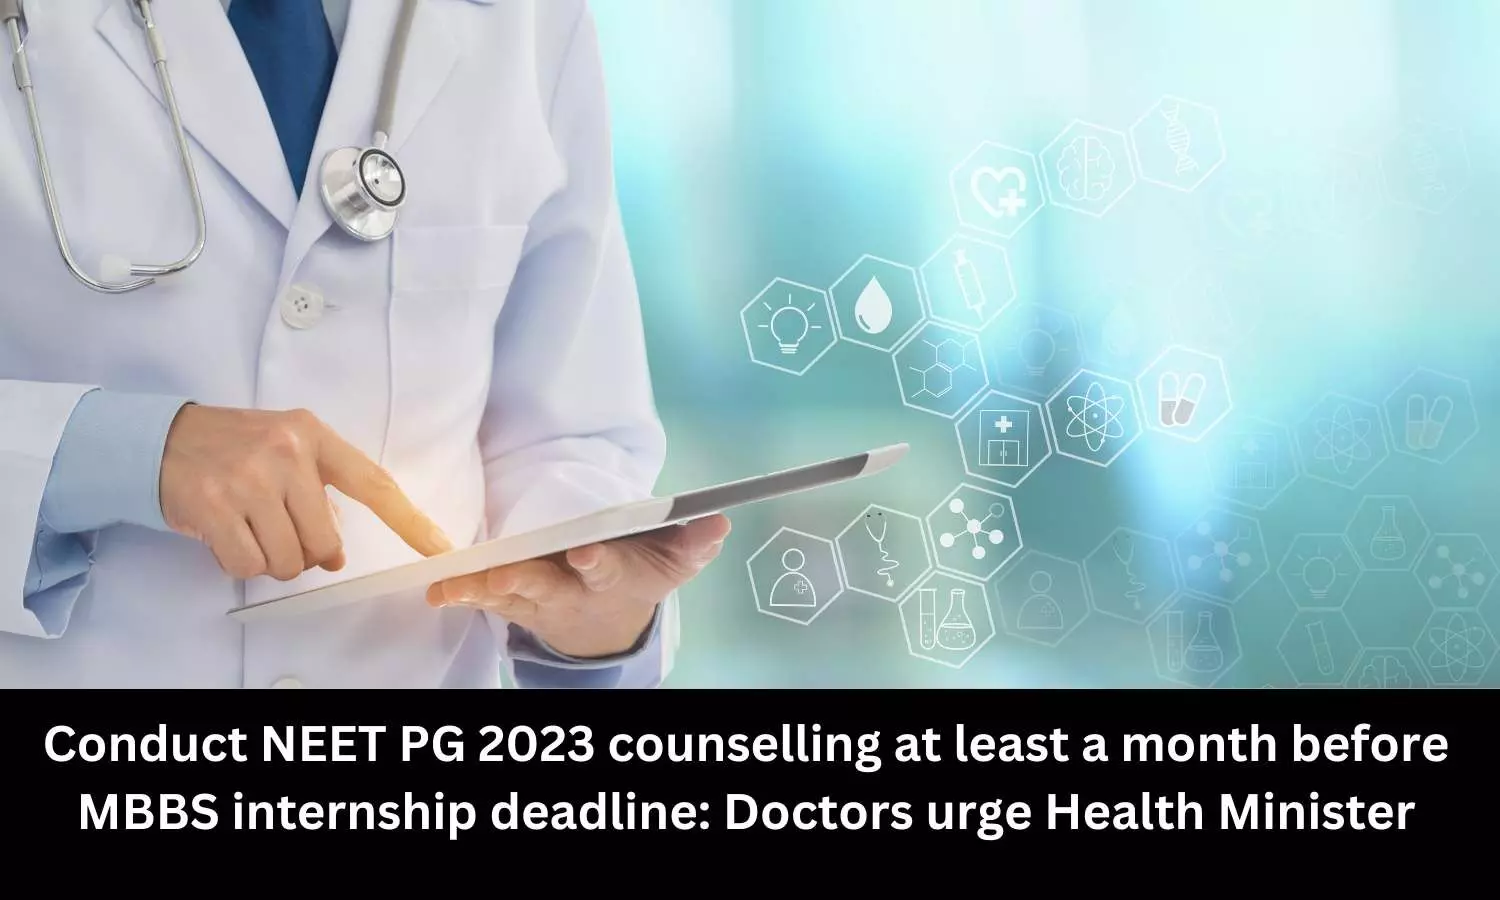 Doctors urge Health Minister to conduct NEET PG 2023 counselling at least month before MBBS internship deadline